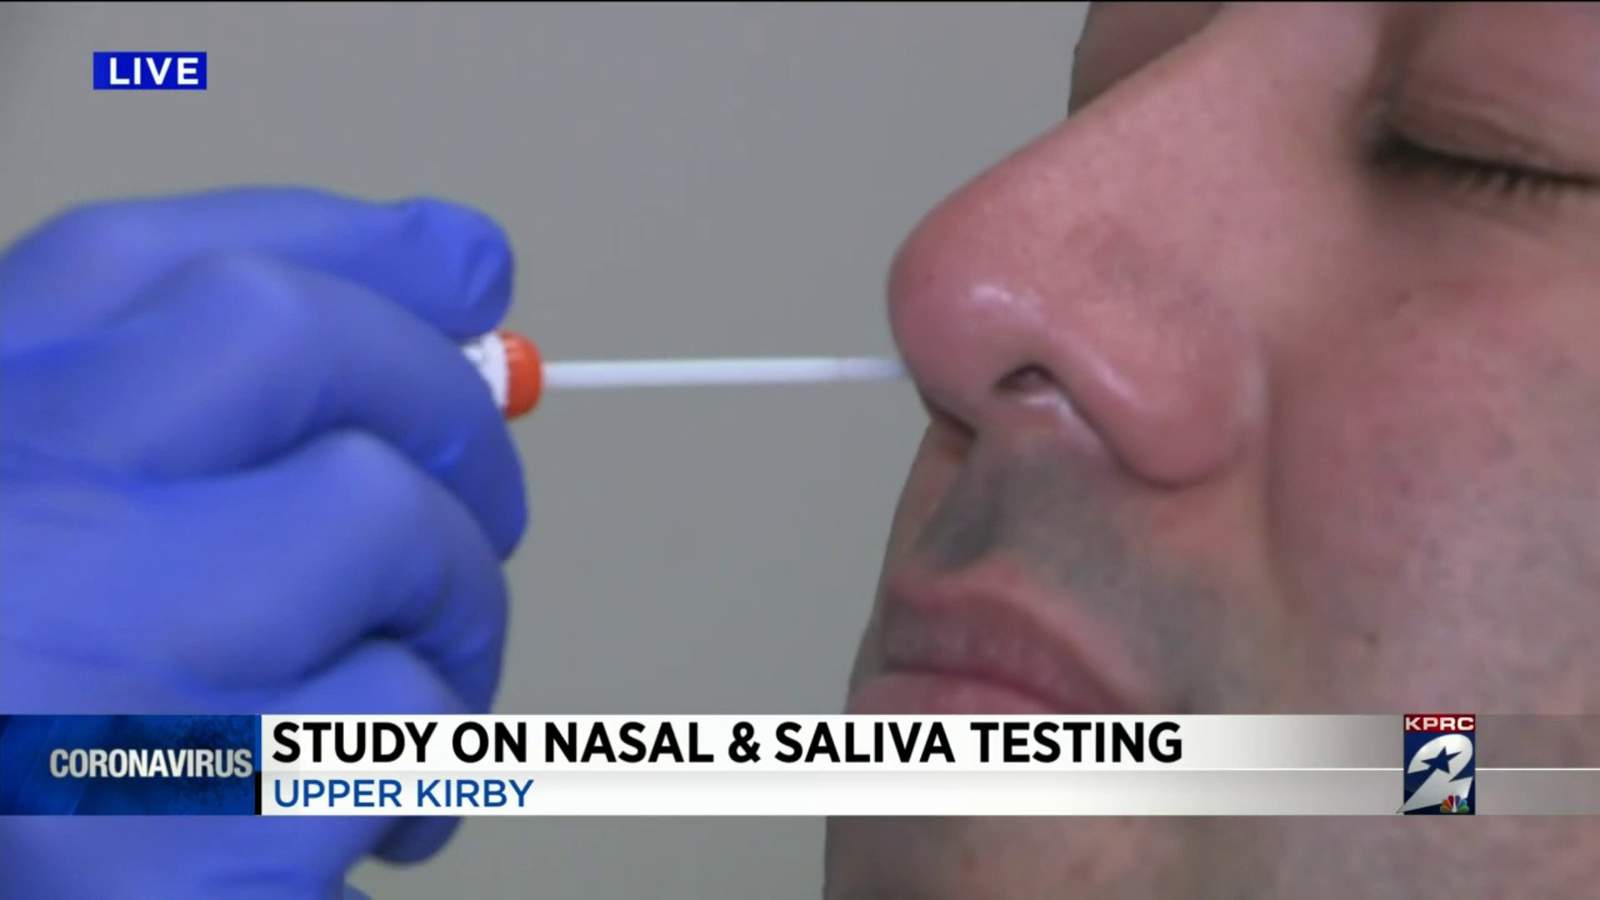 Nasal swabs or saliva testing? Local medical facility conducts study to determine which is more effective.